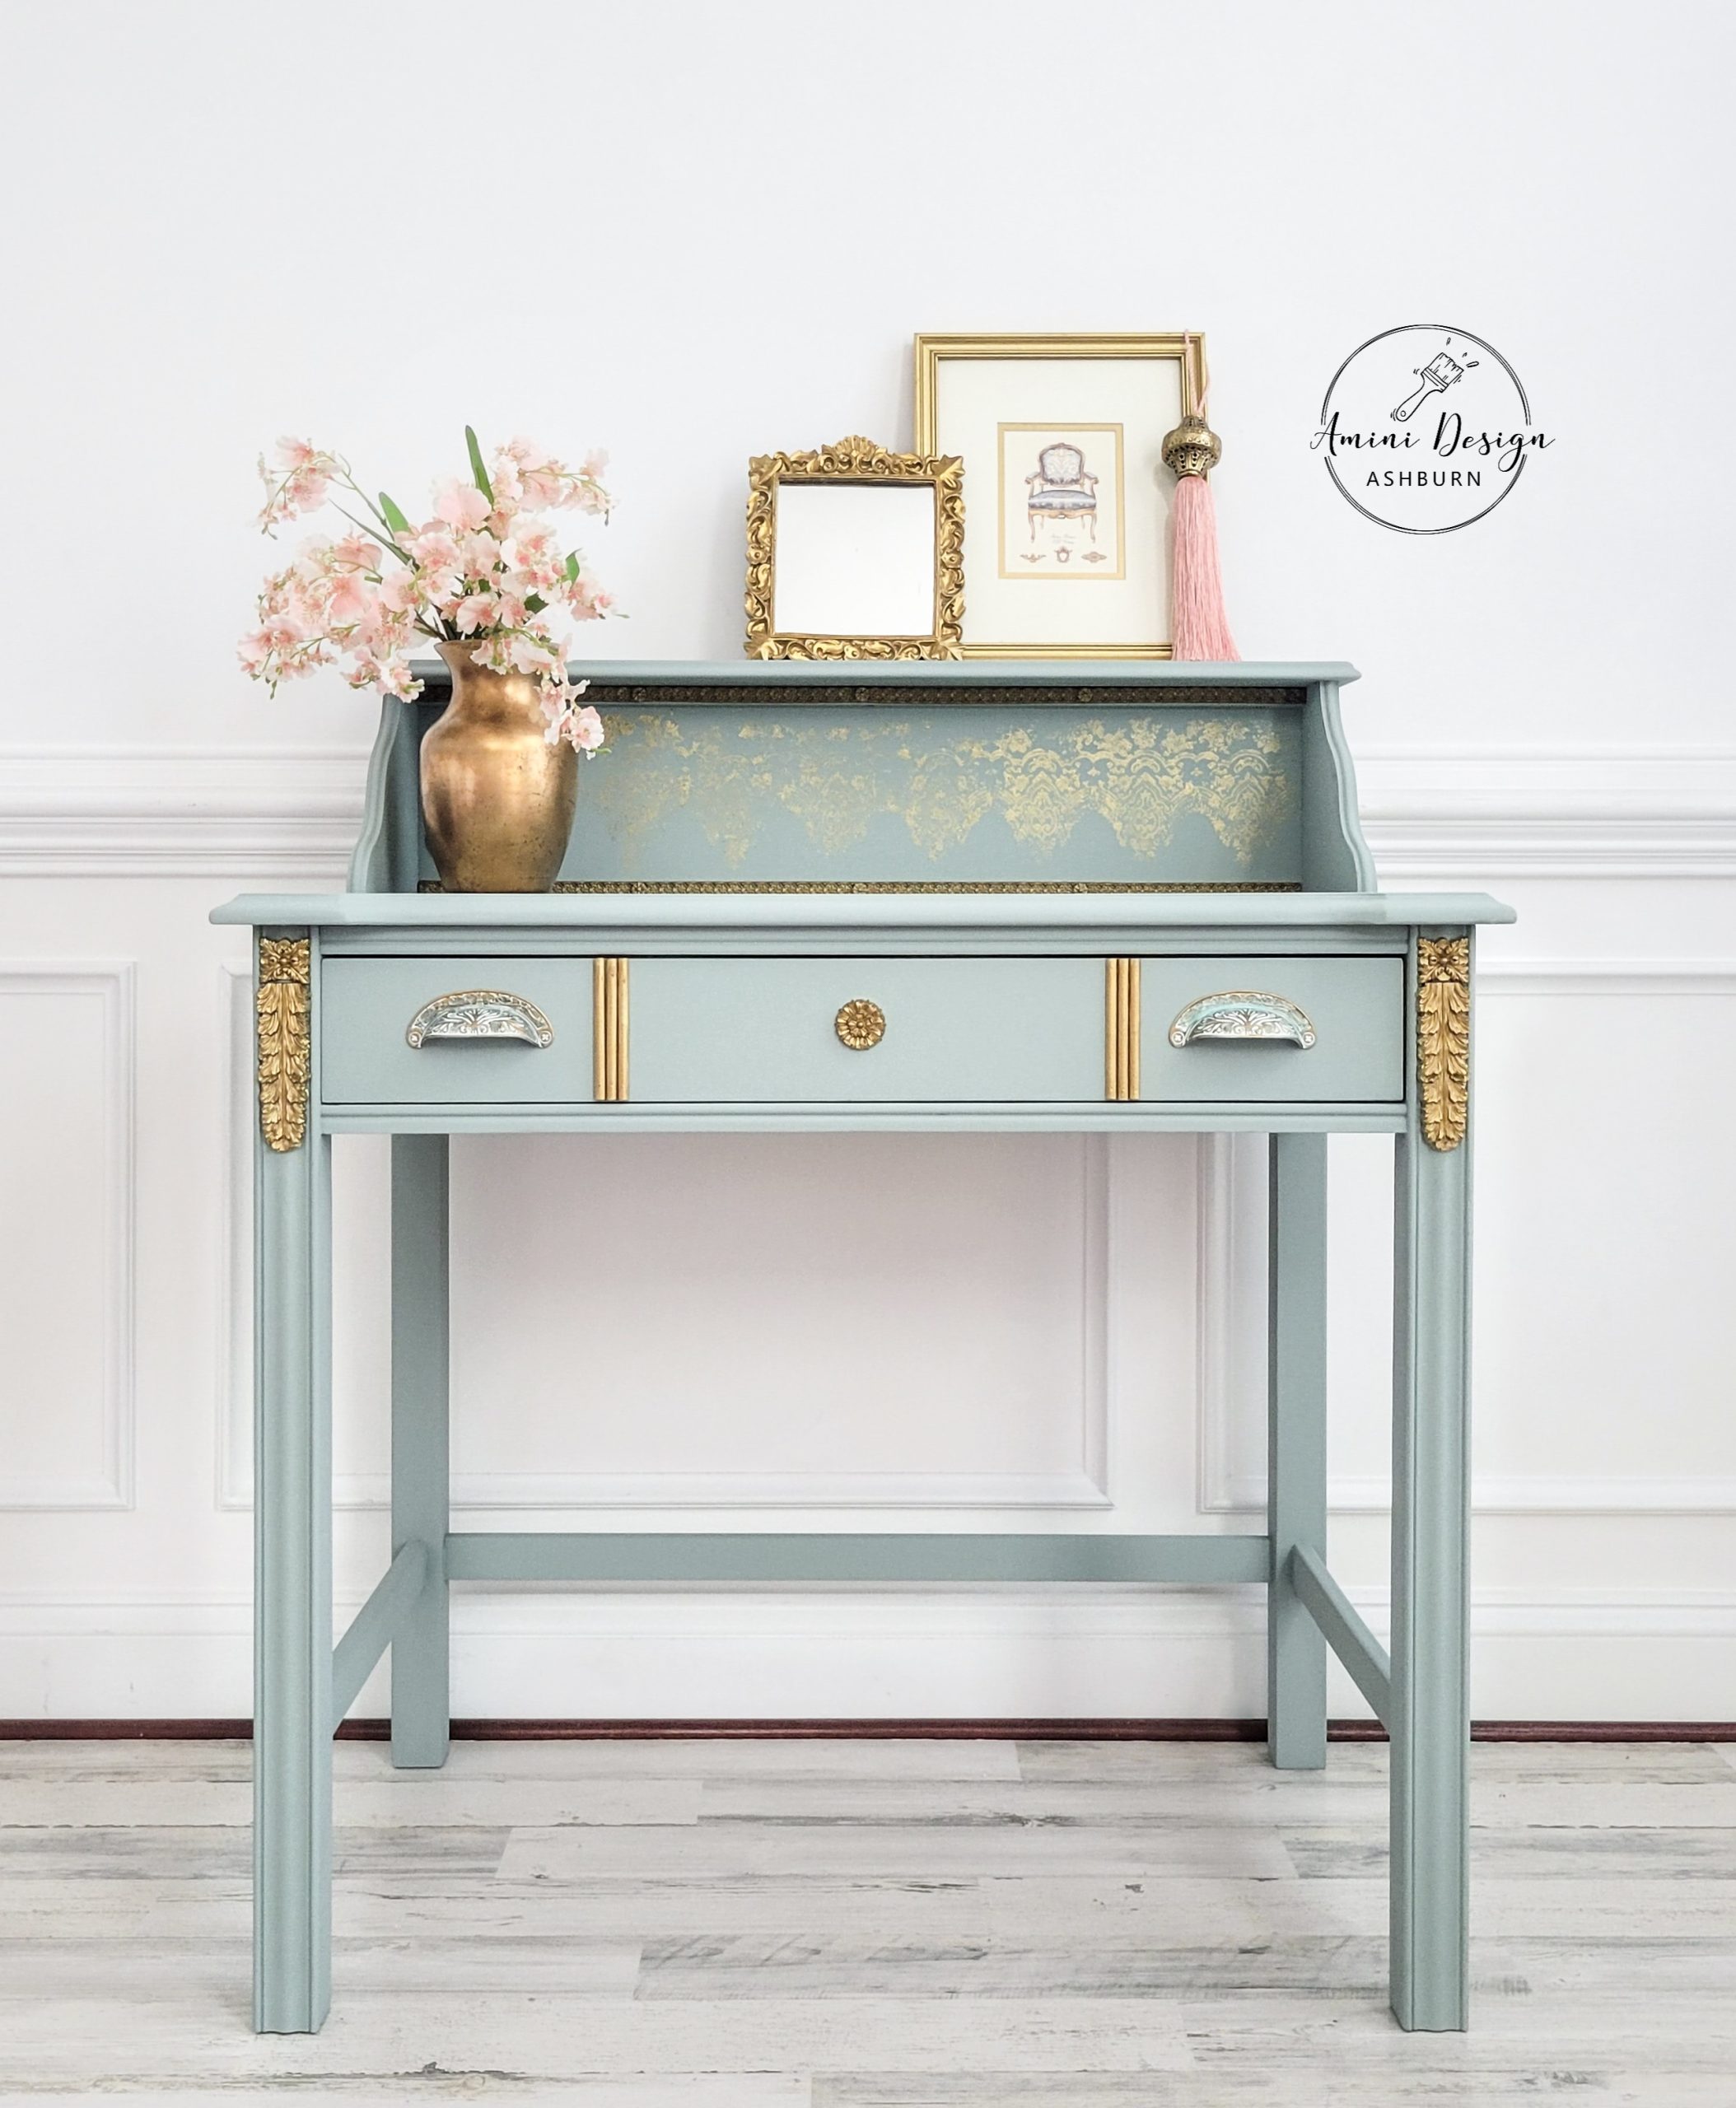 Ornate antique secretary desk painted in pastel green with gold decorative accents